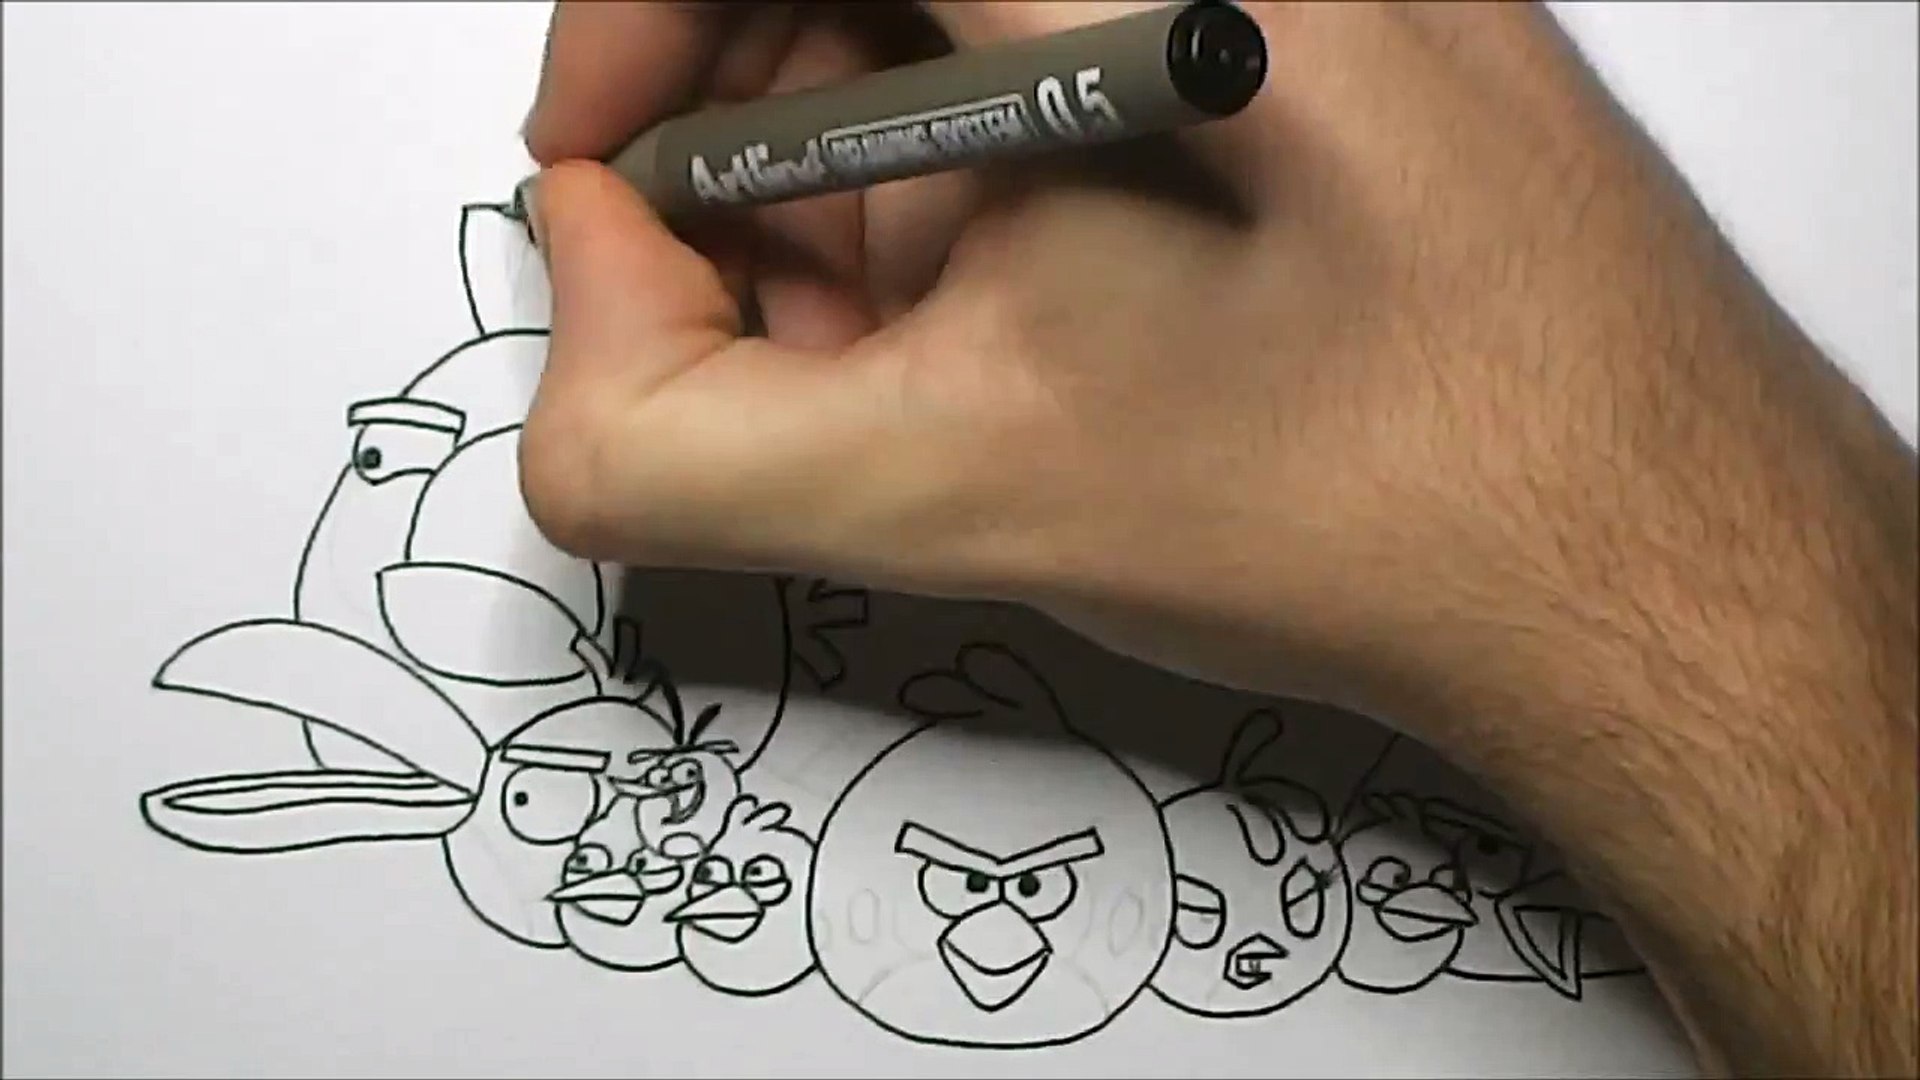 how to draw angry birds avengers